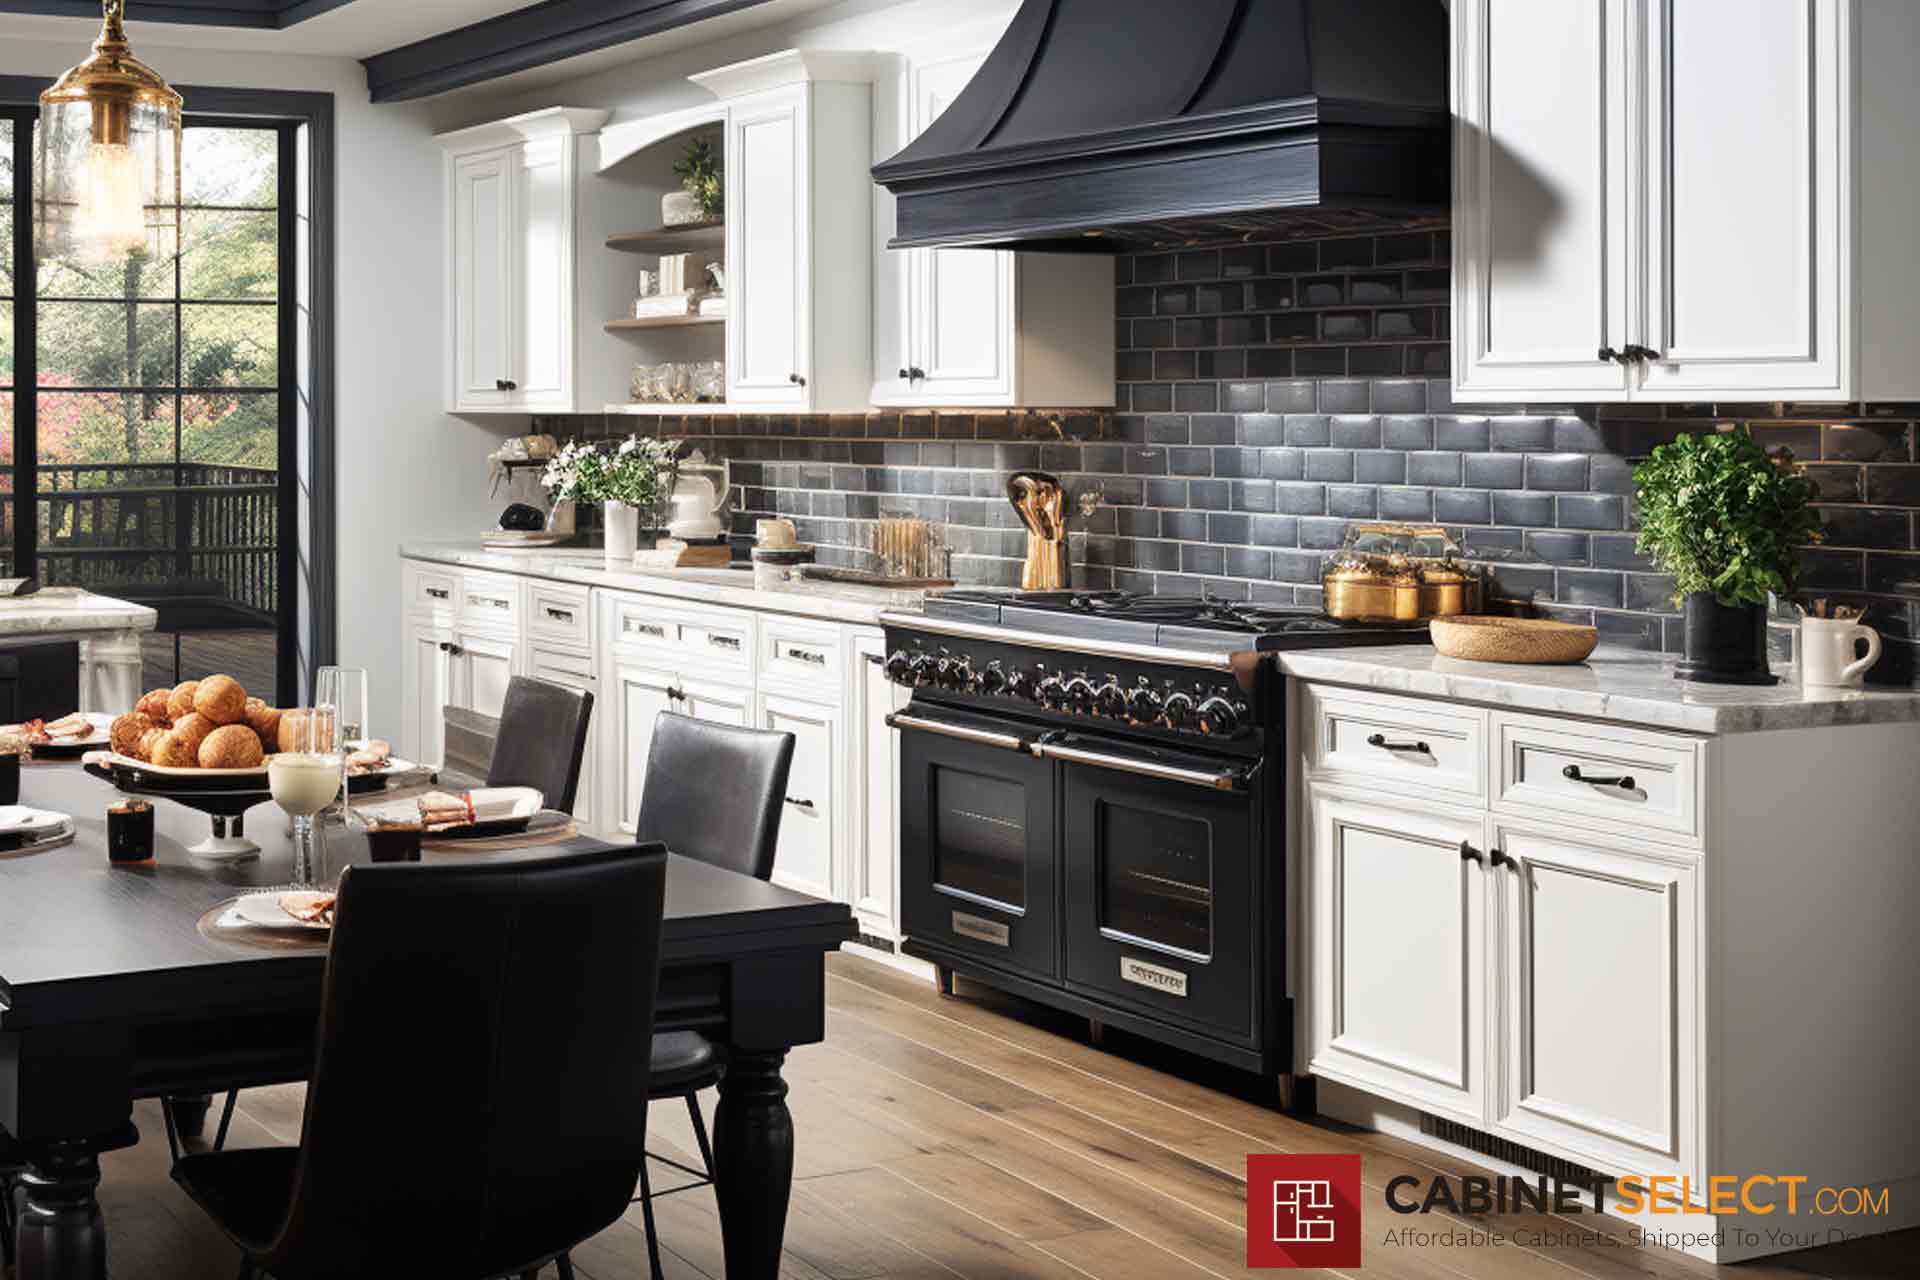 https://cabinetselect.com/cswp/wp-content/uploads/2023/08/white-kitchen-black-stove-focal-point-6.jpg